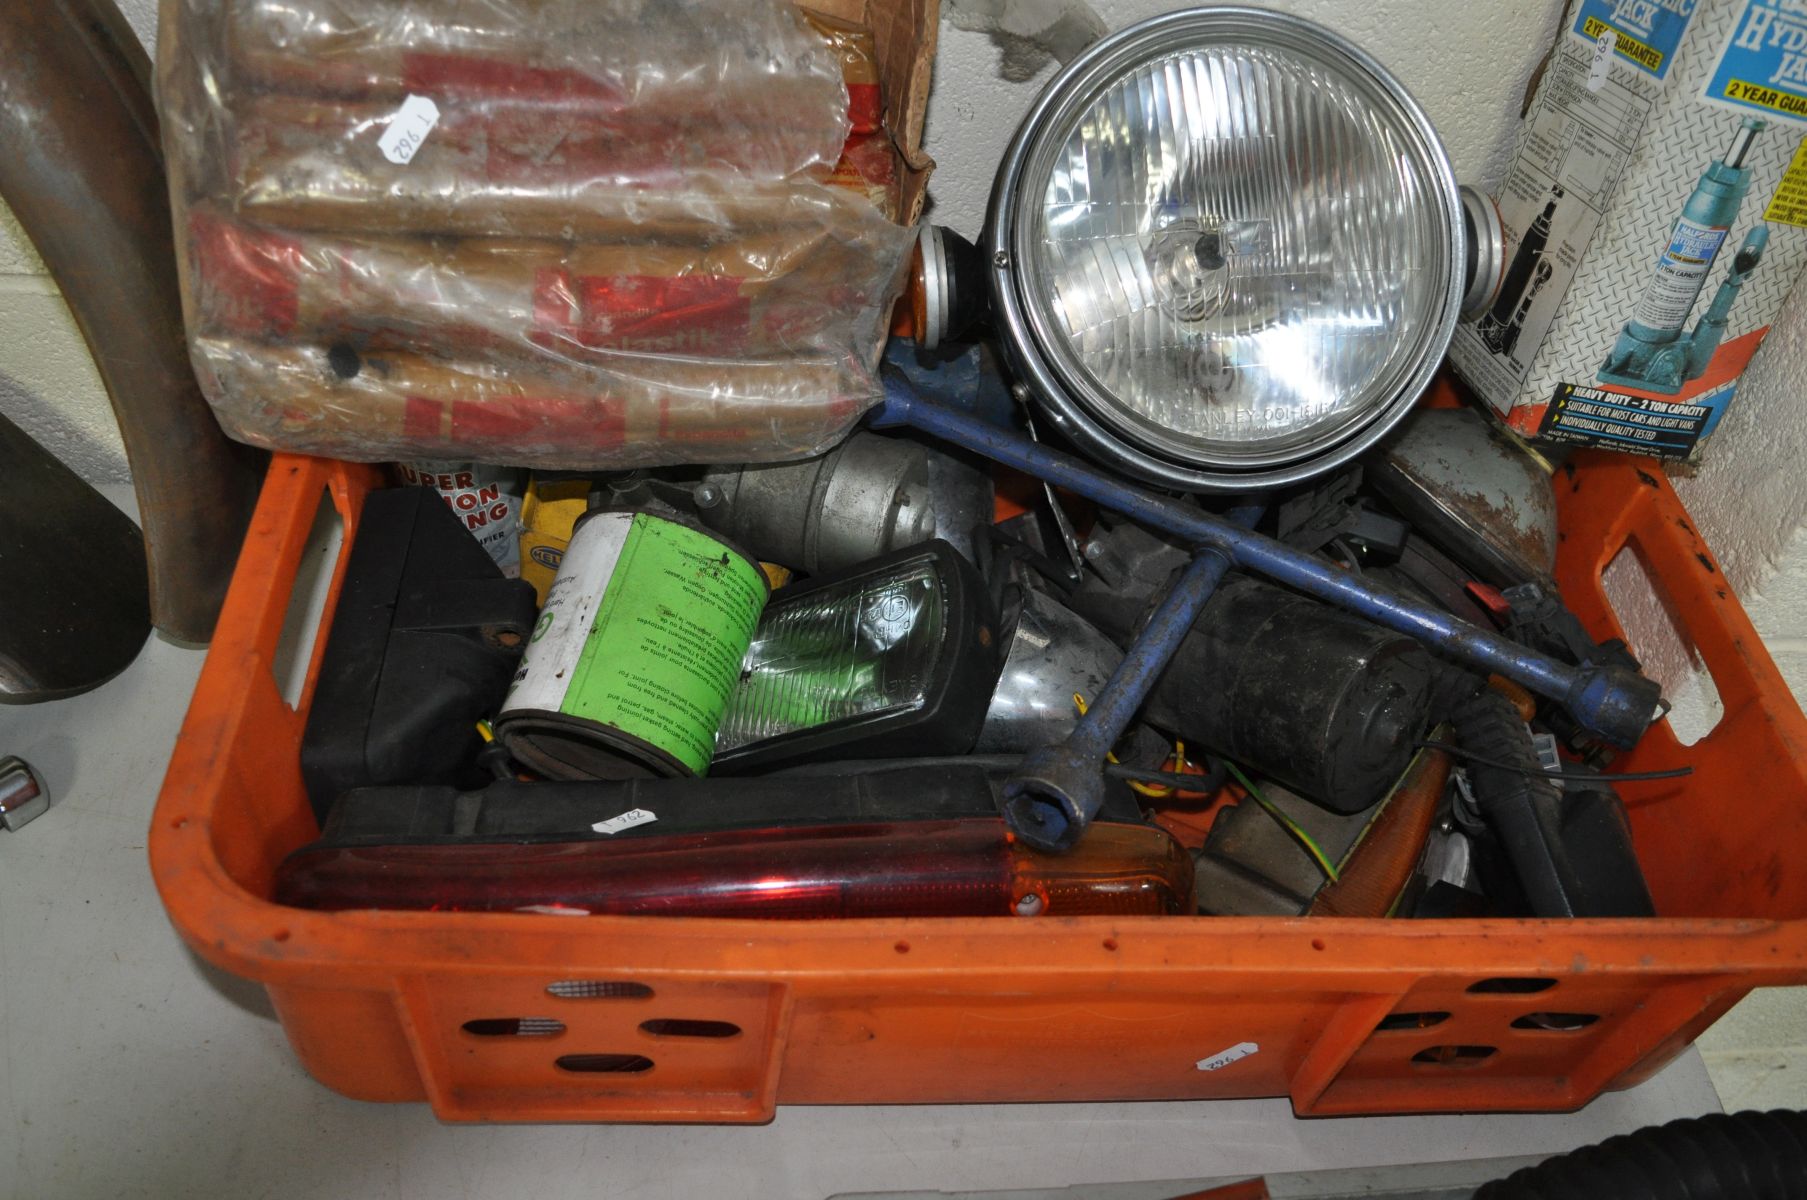 TWO TRAYS CONTAINING VINTAGE AUTOMOTIVE PARTS, including a motorbike fuel tank, mud guards, handle - Image 4 of 4